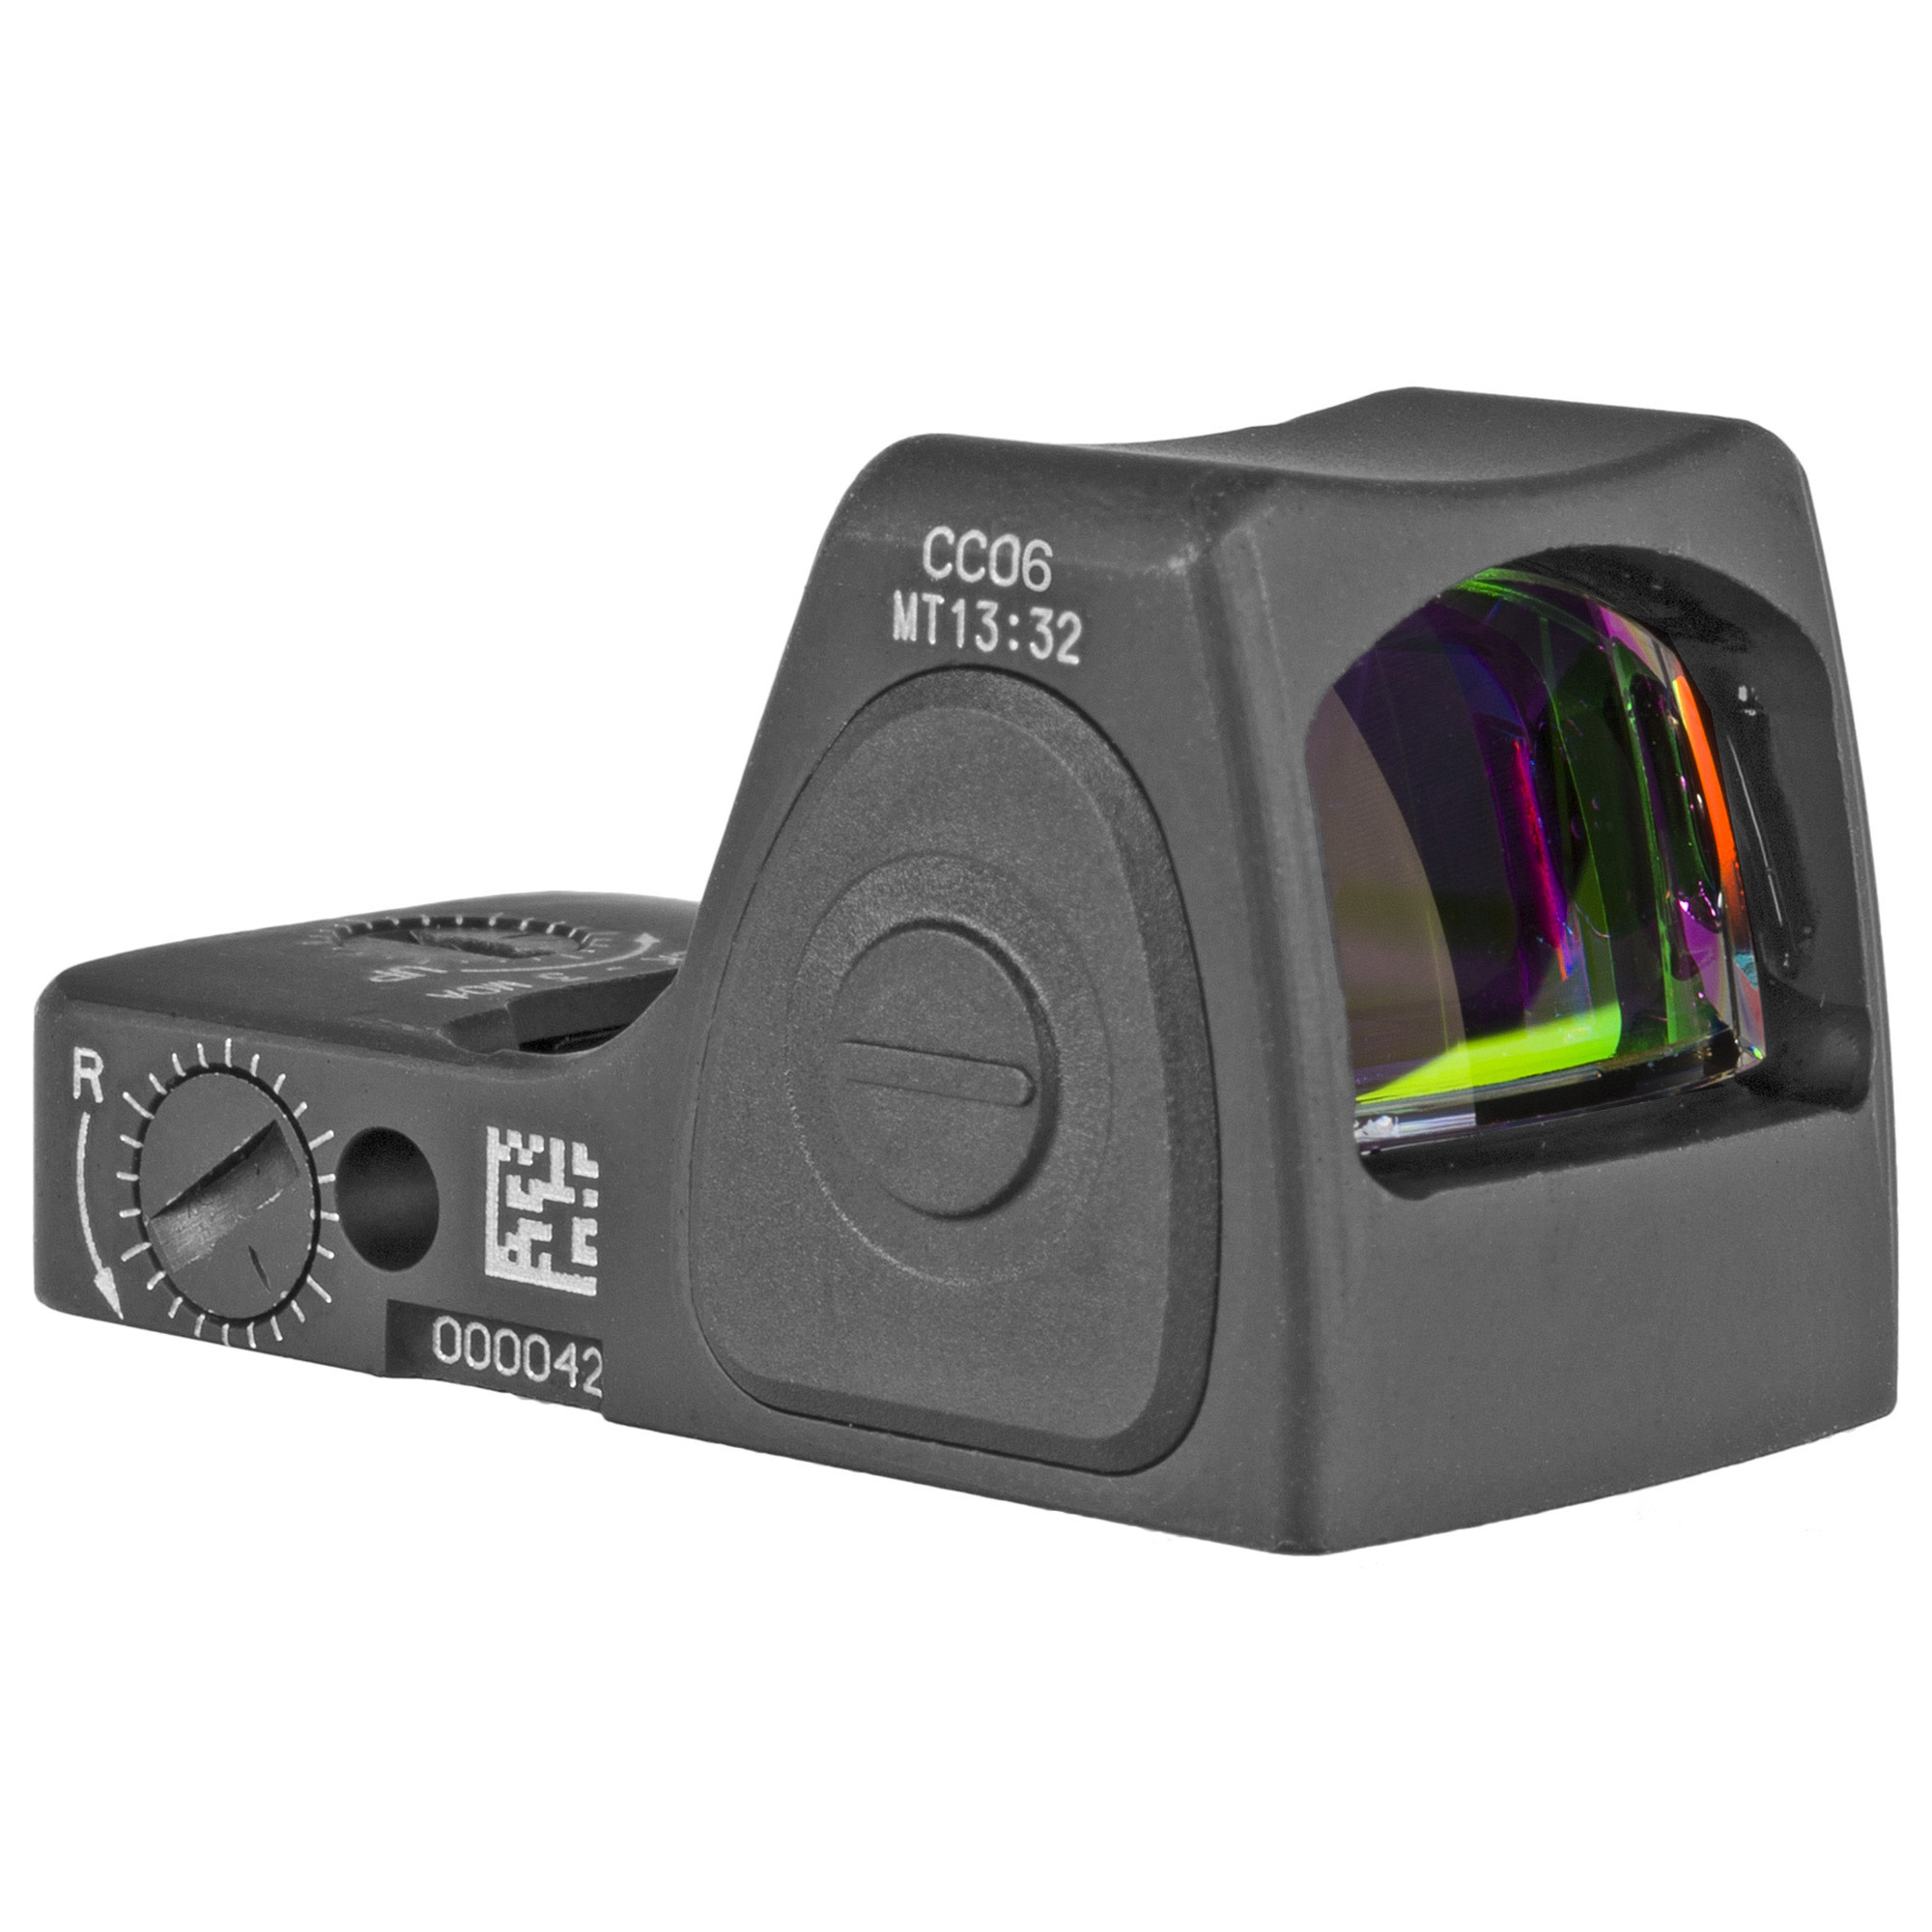 Trijicon RMRcc (Concealed Carry), Micro Reflex Sight, 3.25 MOA Red Dot, Black